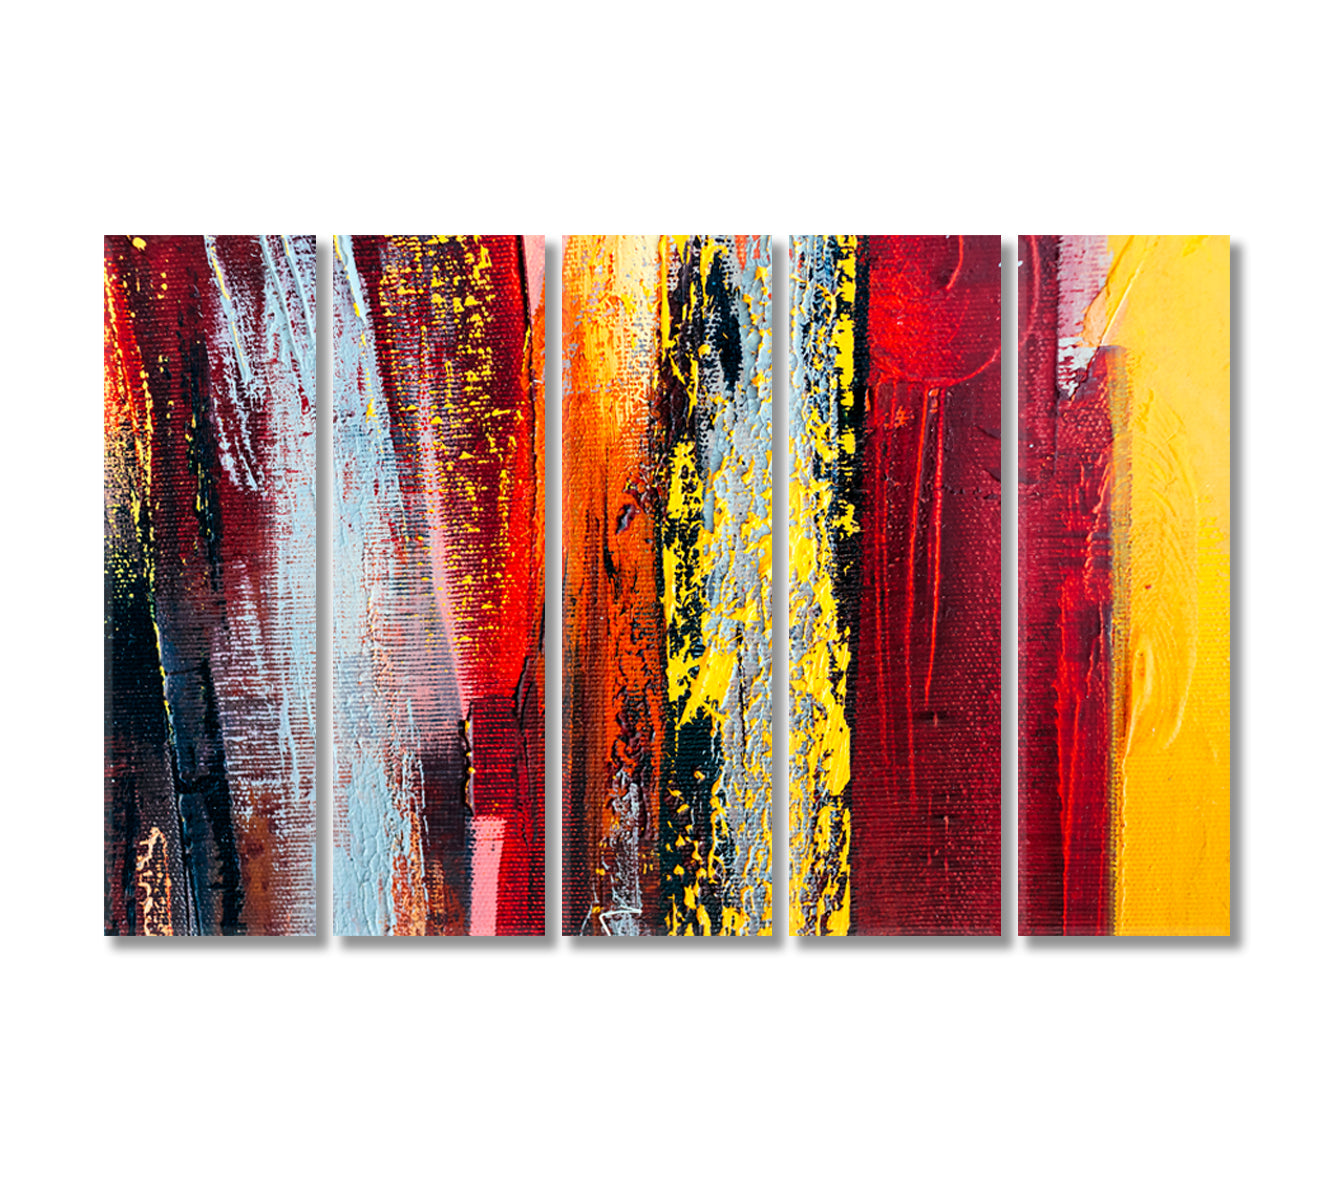 Colorful Abstract Oil Brush Strokes Canvas Print-Canvas Print-CetArt-5 Panels-36x24 inches-CetArt